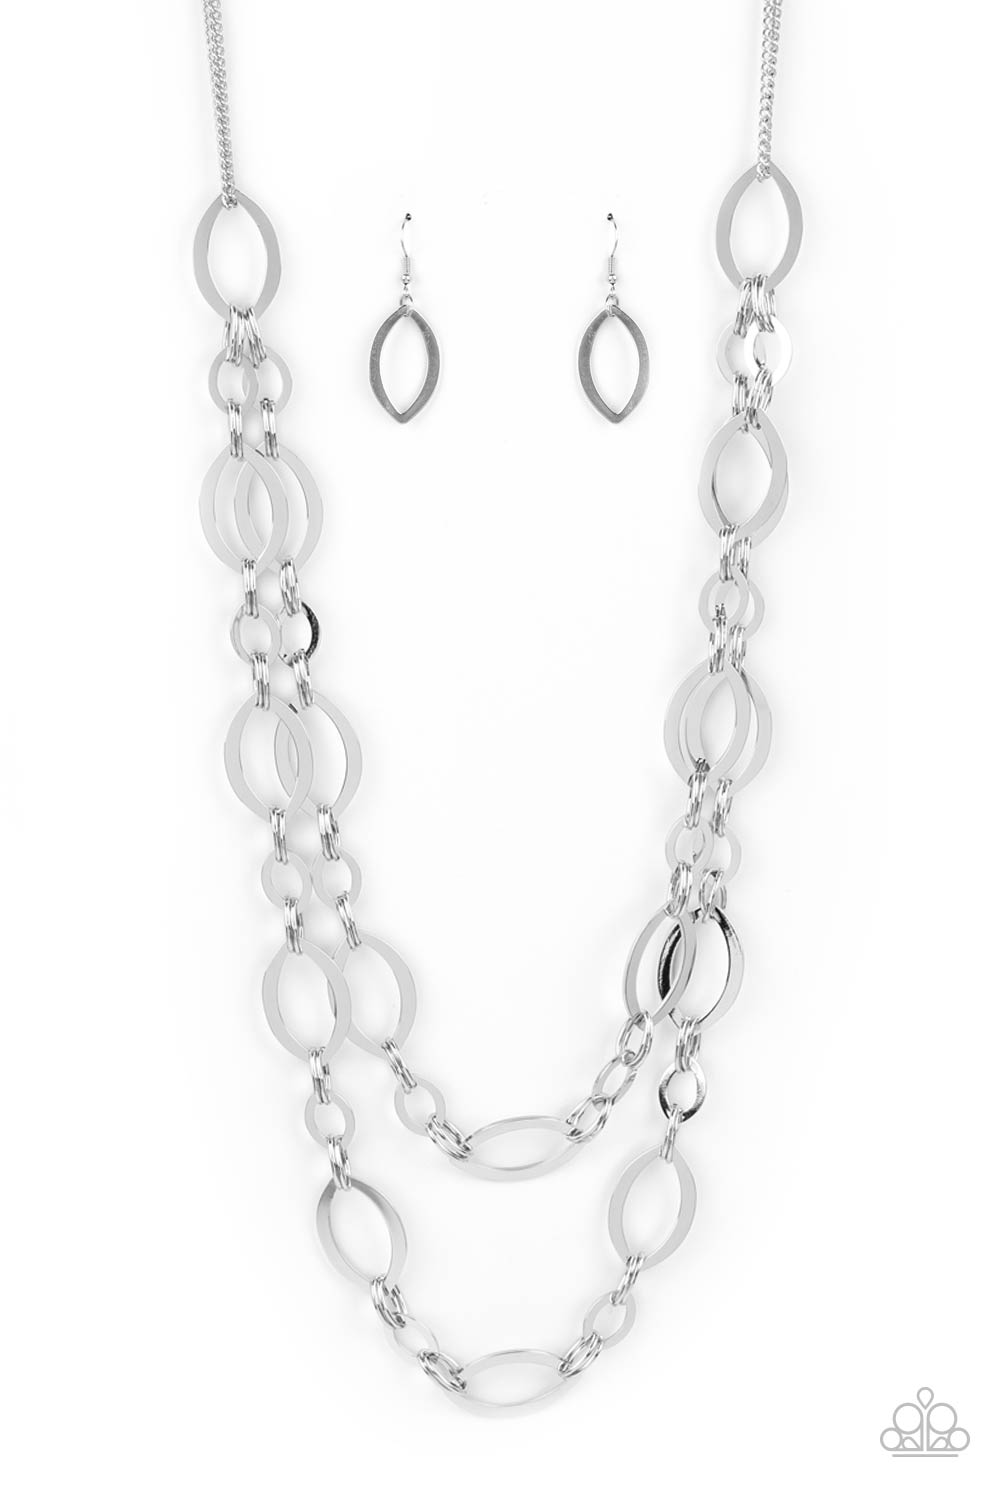 The OVAL-achiever Paparazzi Accessories Necklace with Earrings Silver